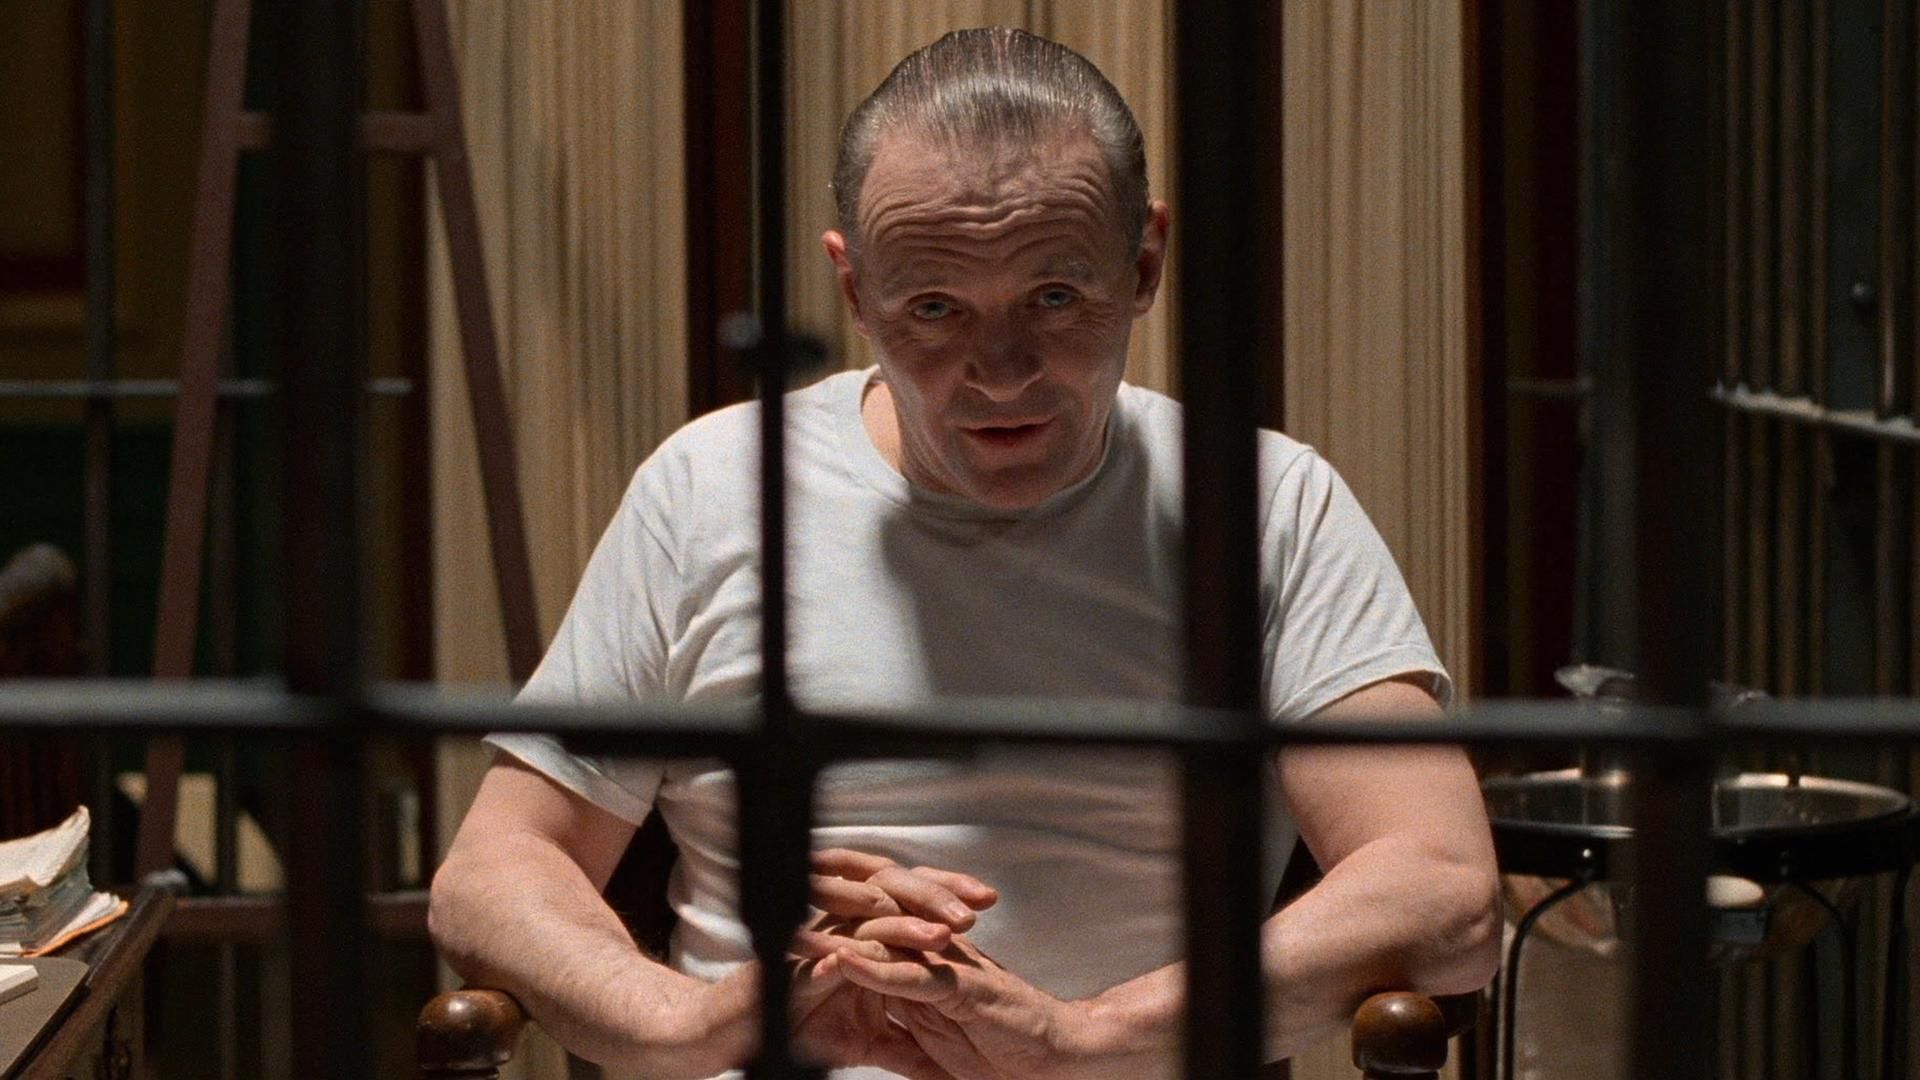 15 Chilling Hannibal Lecter Quotes That Will Give You Goosebumps